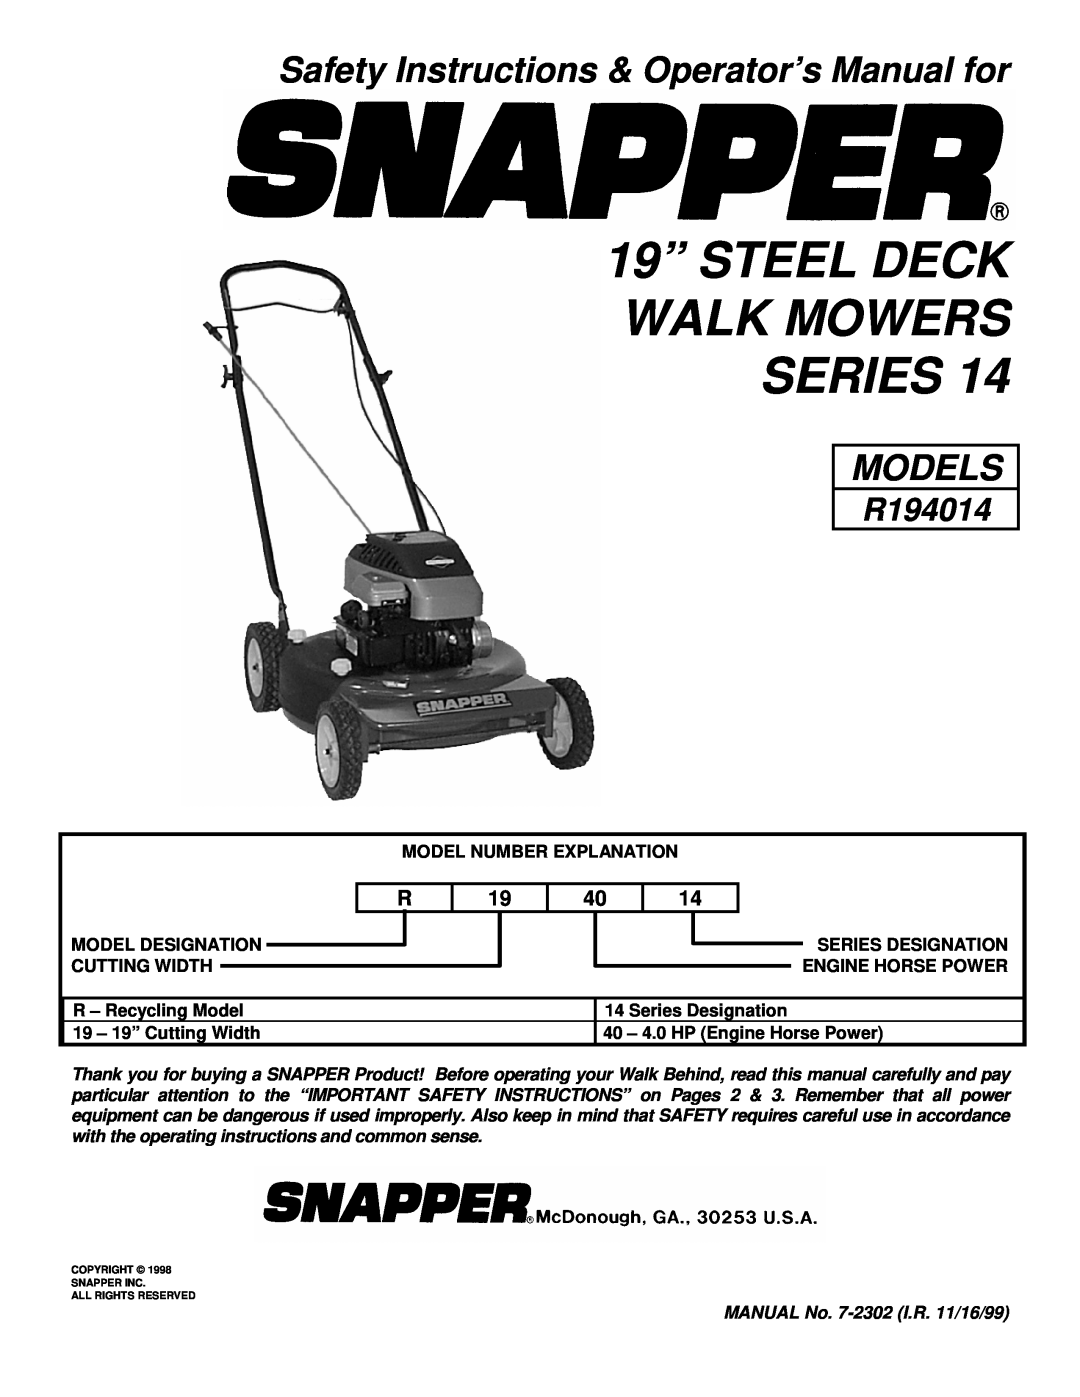 Snapper R194014 important safety instructions 19” STEEL DECK WALK MOWERS SERIES, Models 